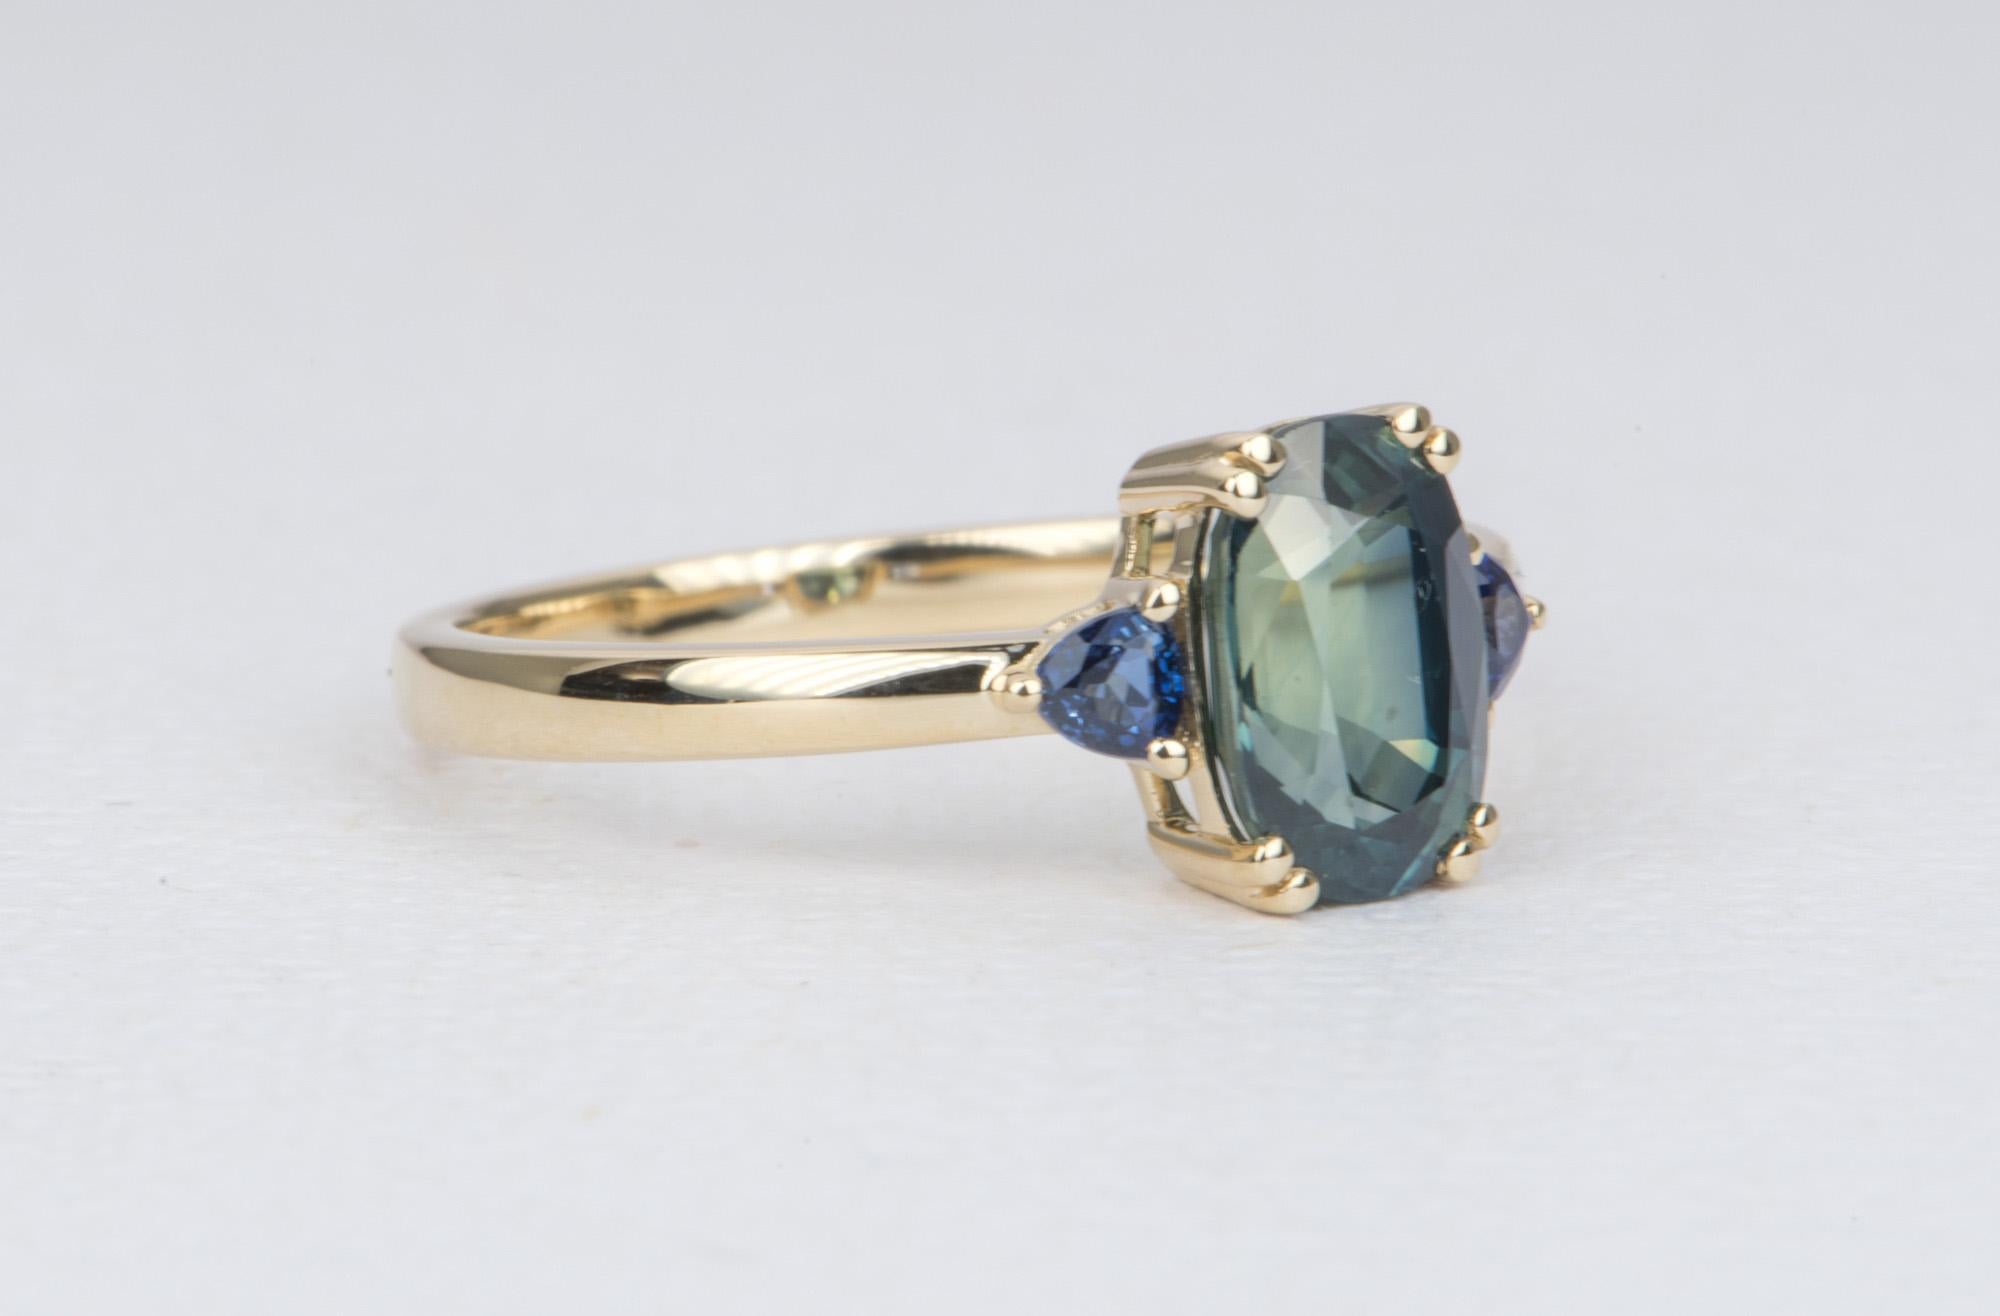 ♥  This is a modern engagement ring with a beautiful oval/cushion cut blue sapphire in the center, flanked by two trillion-shaped sapphires on the side. The corners of the main sapphire are set with double prongs for a unique look.
♥  The center